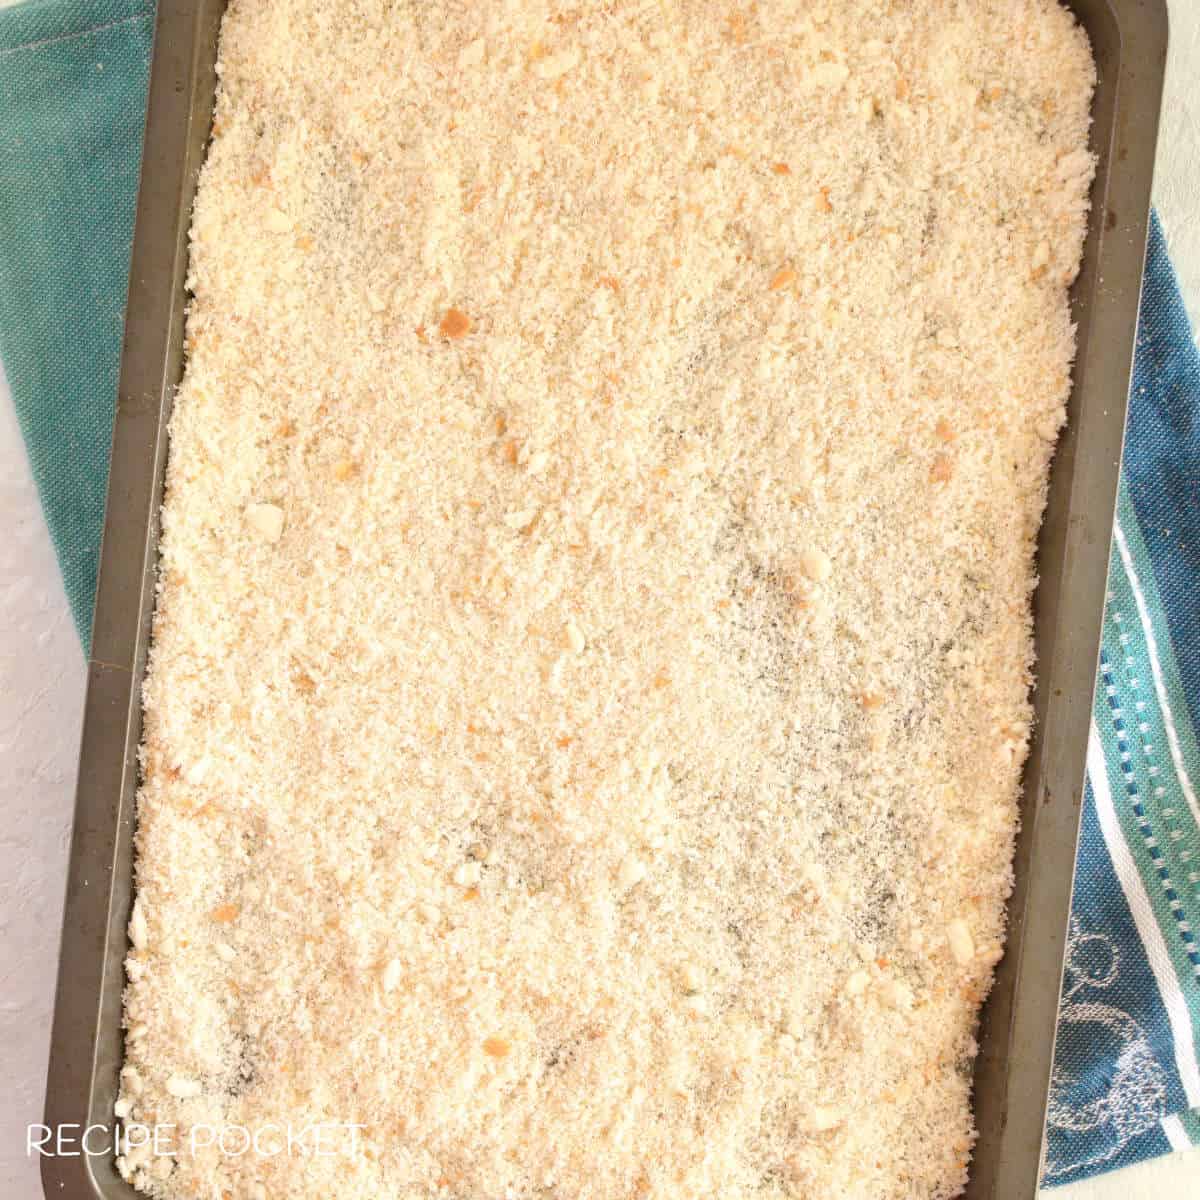 Unbaked bread crumbs on a tray.